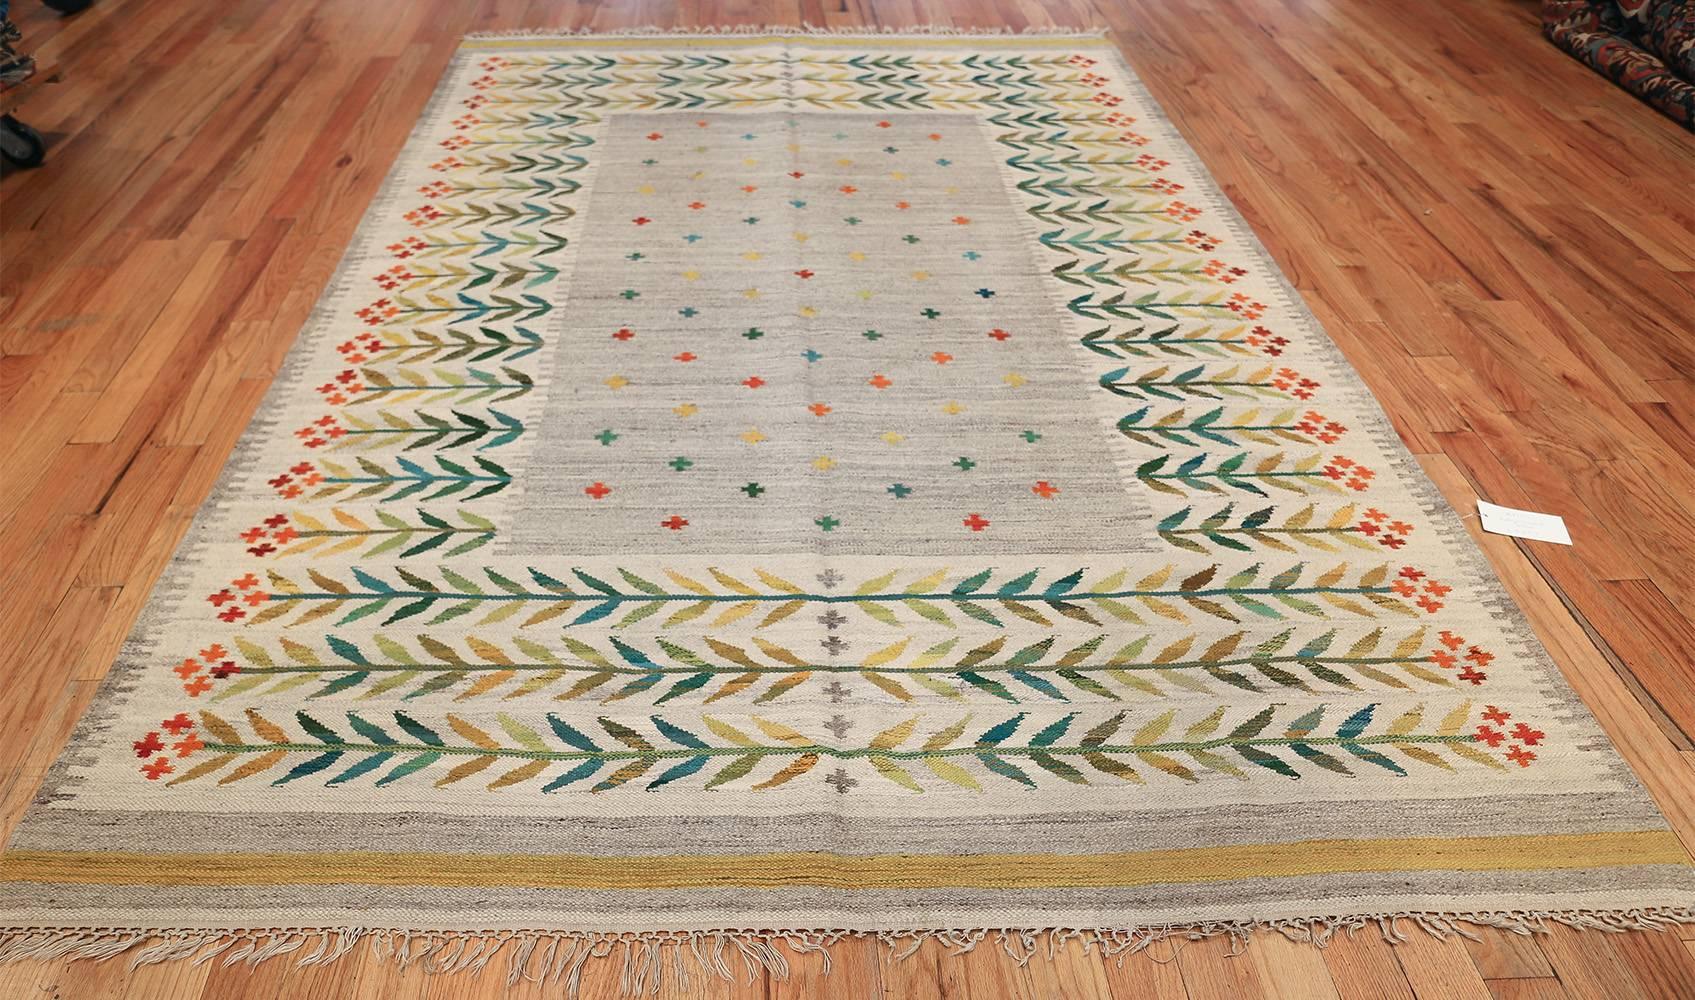 20th Century Vintage Scandinavian Flat Woven Swedish Kilim Rug. Size: 6 ft 8 in x 9 ft 9 in